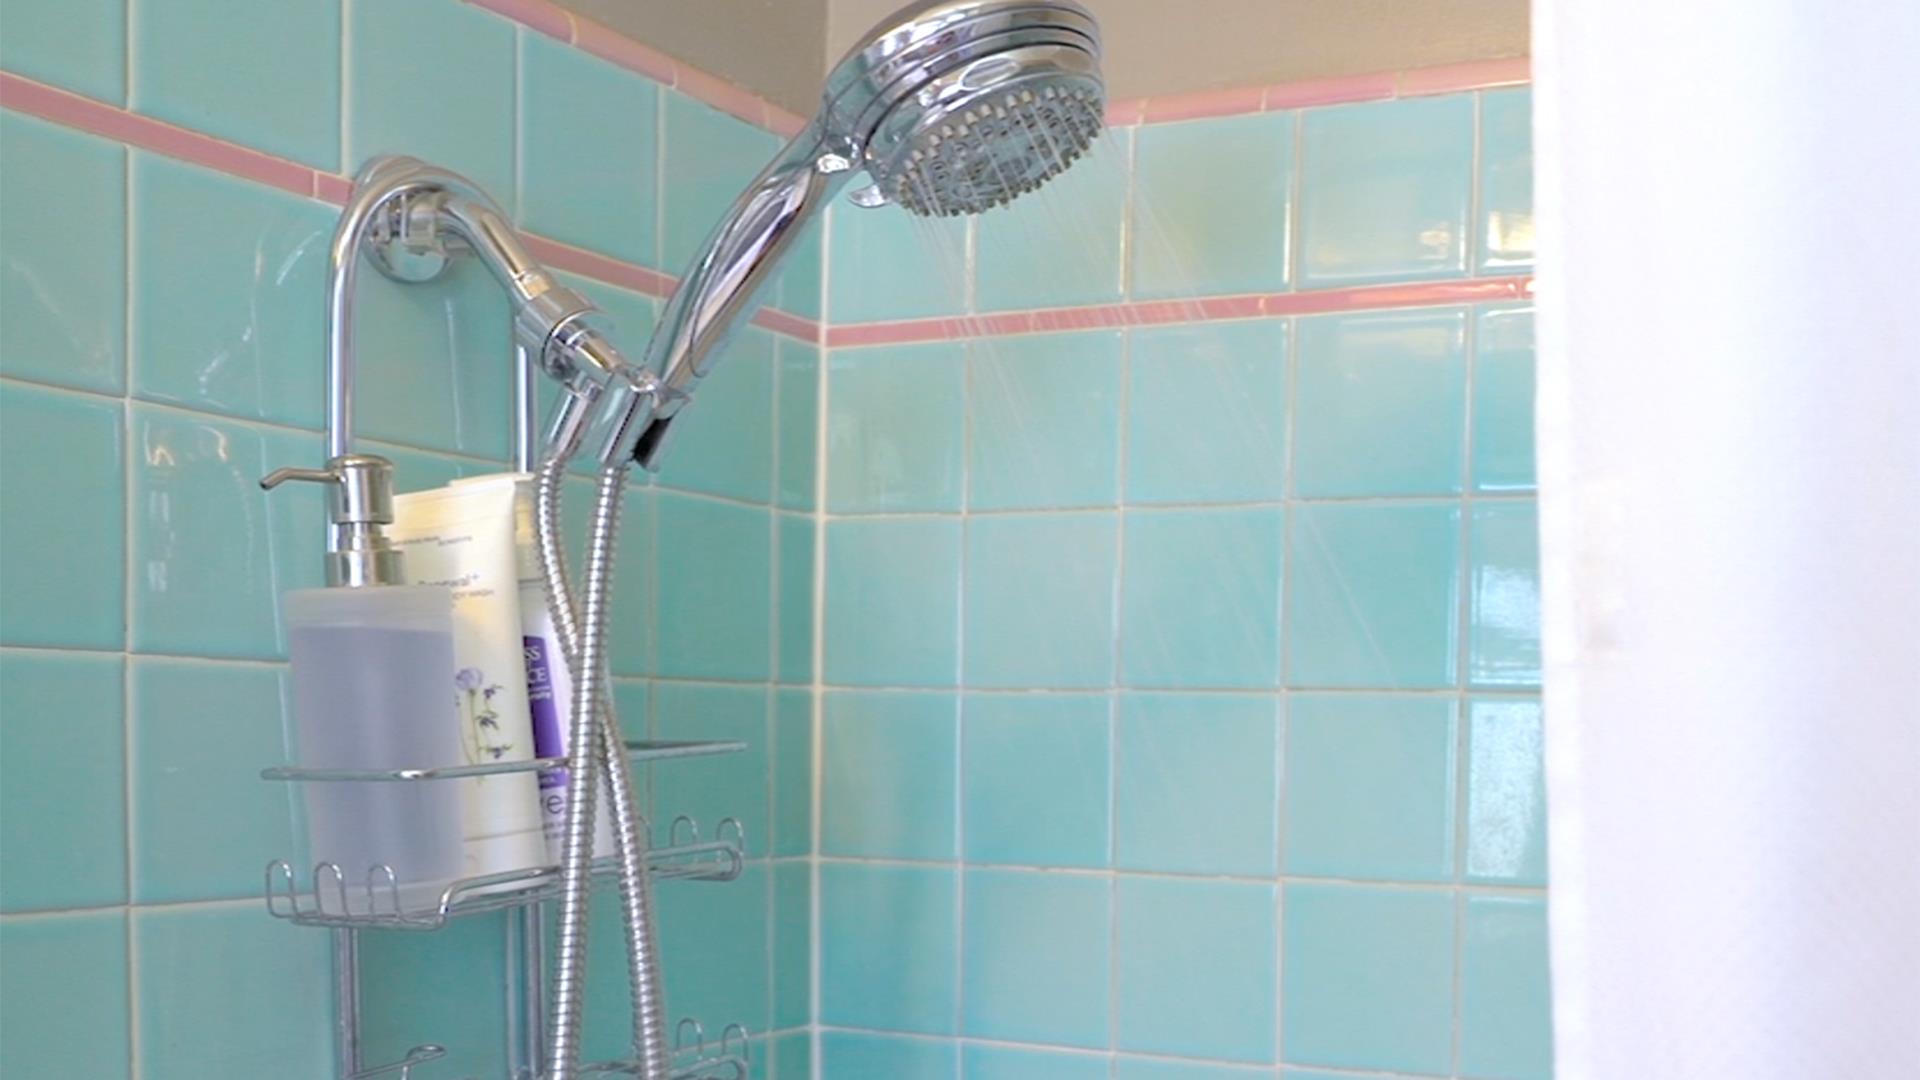 What is the best way to clean a shower and maintain it clean in